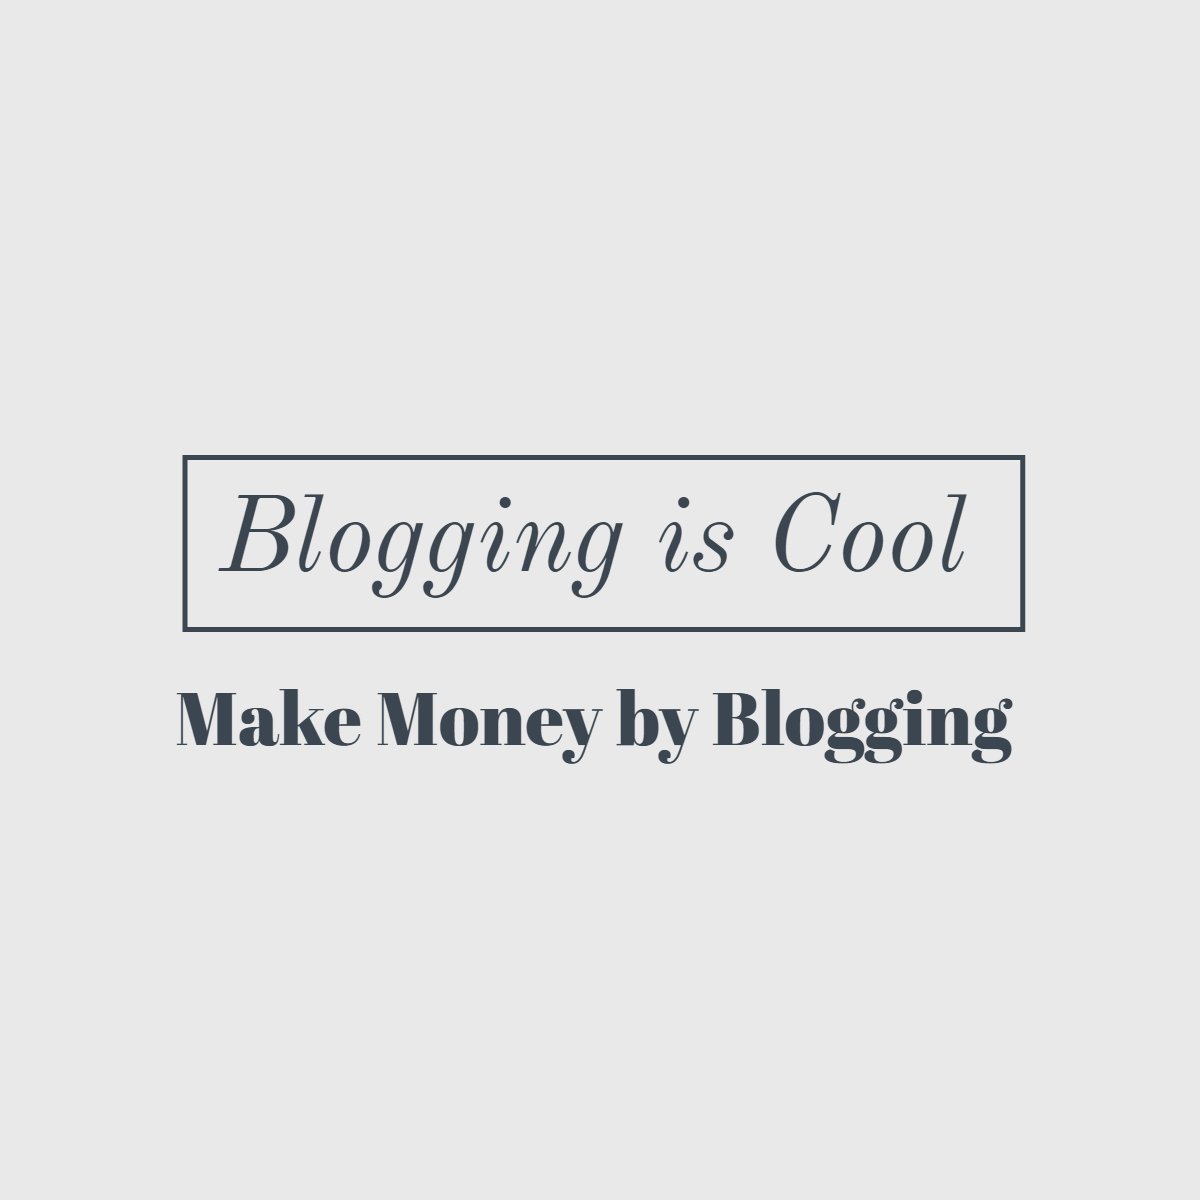 bloggingiscool.com is a blog about becoming a better blogger through learning